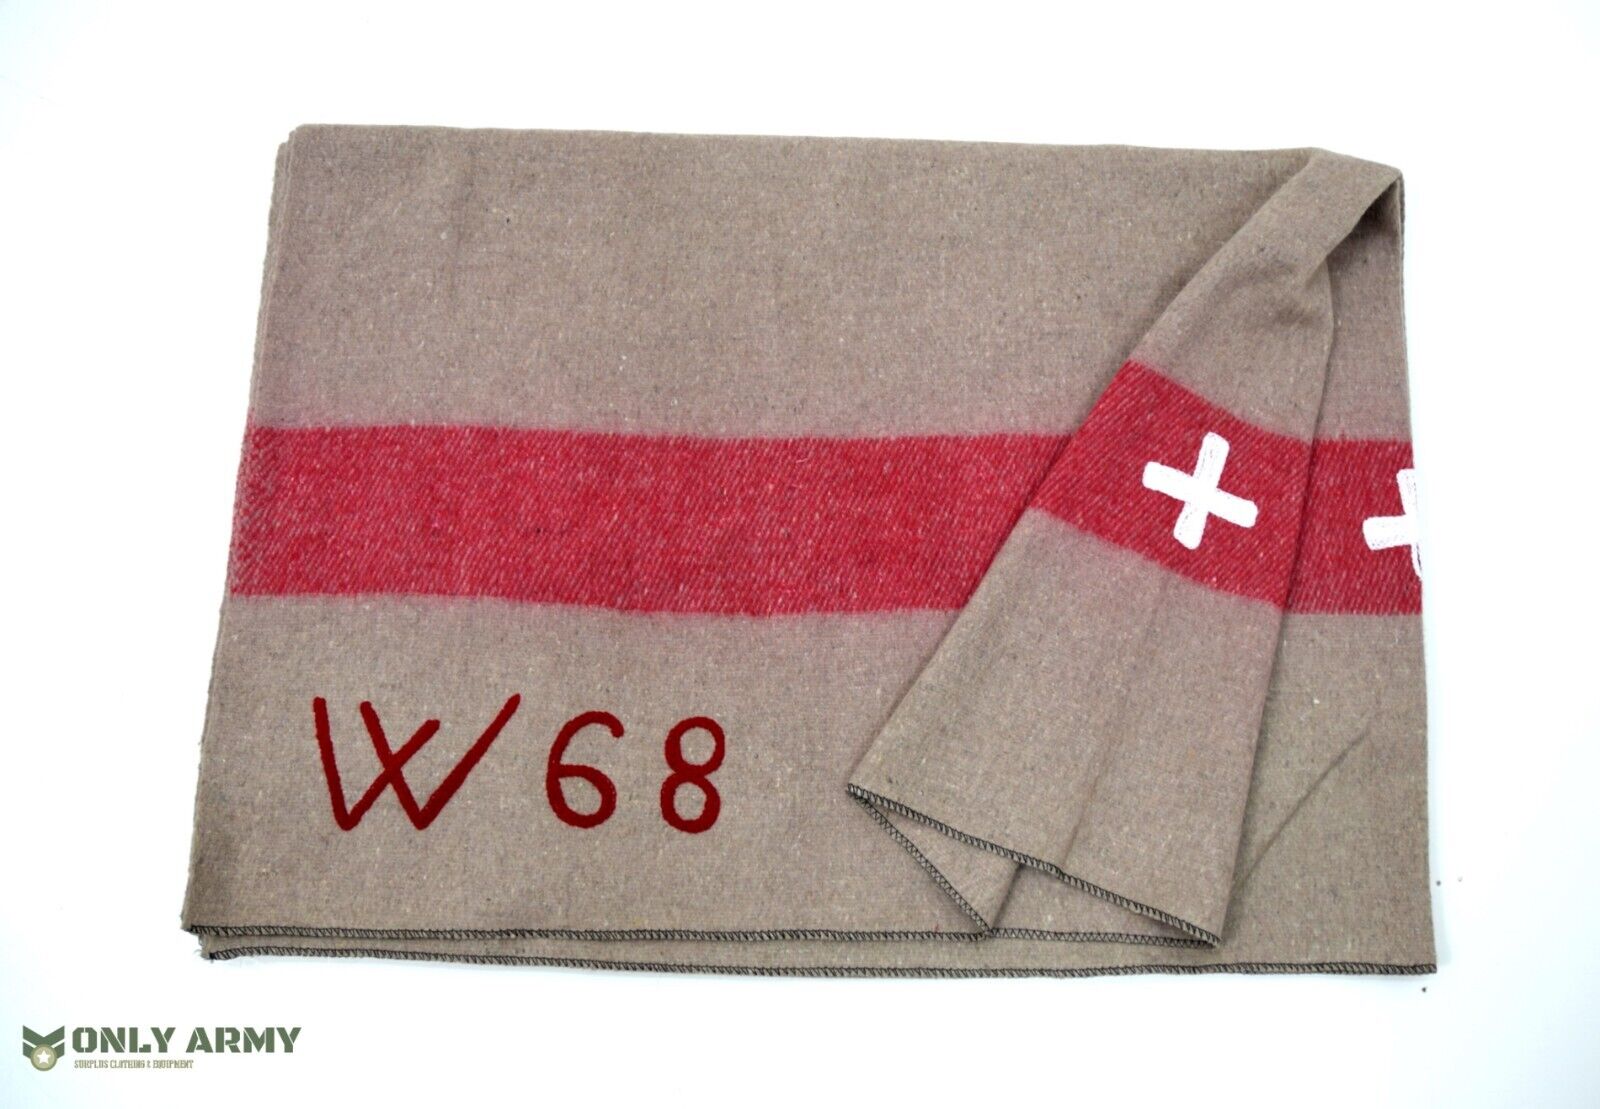 Swiss Army Wool Blanket Stripe & Cross High Quality Military Bedding Camping